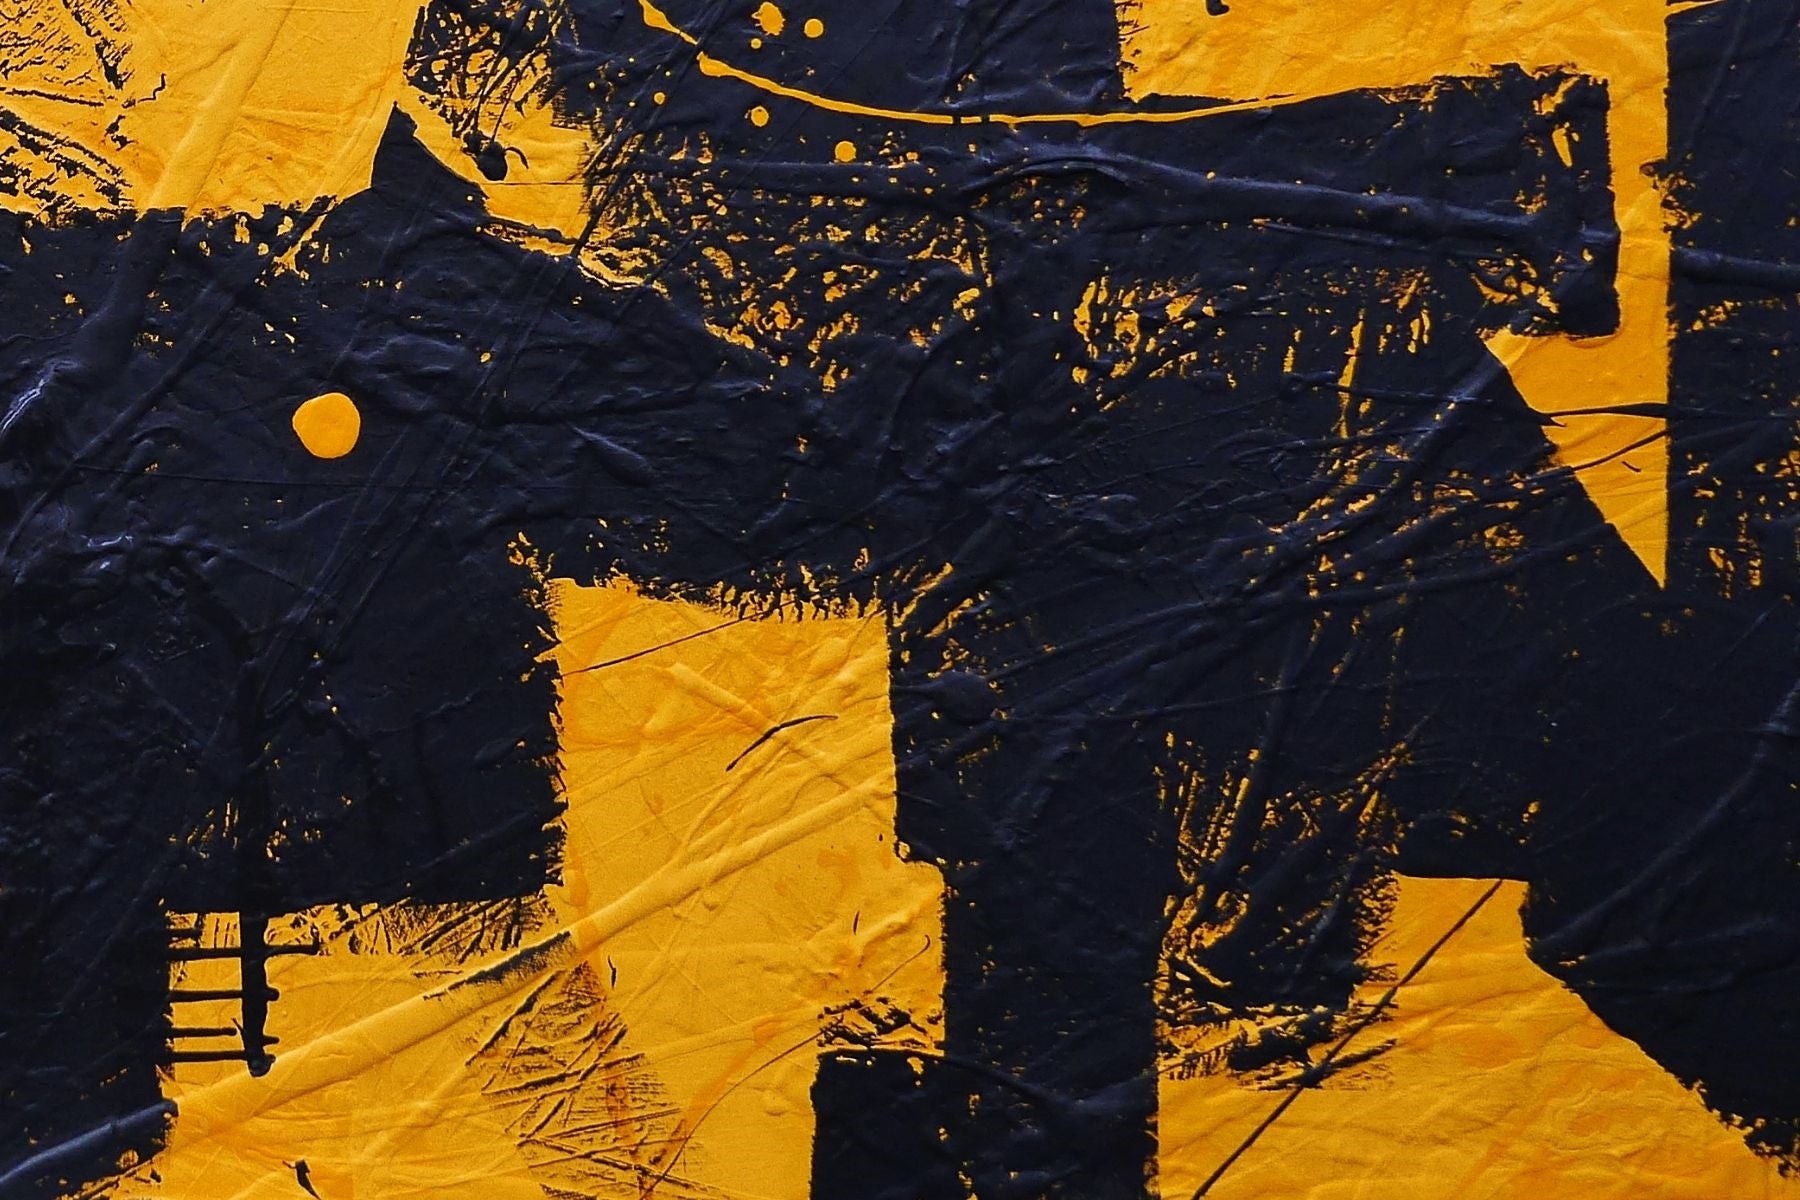 Stay Golden 240cm x 120cm Black and Yellow Textured Abstract Painting